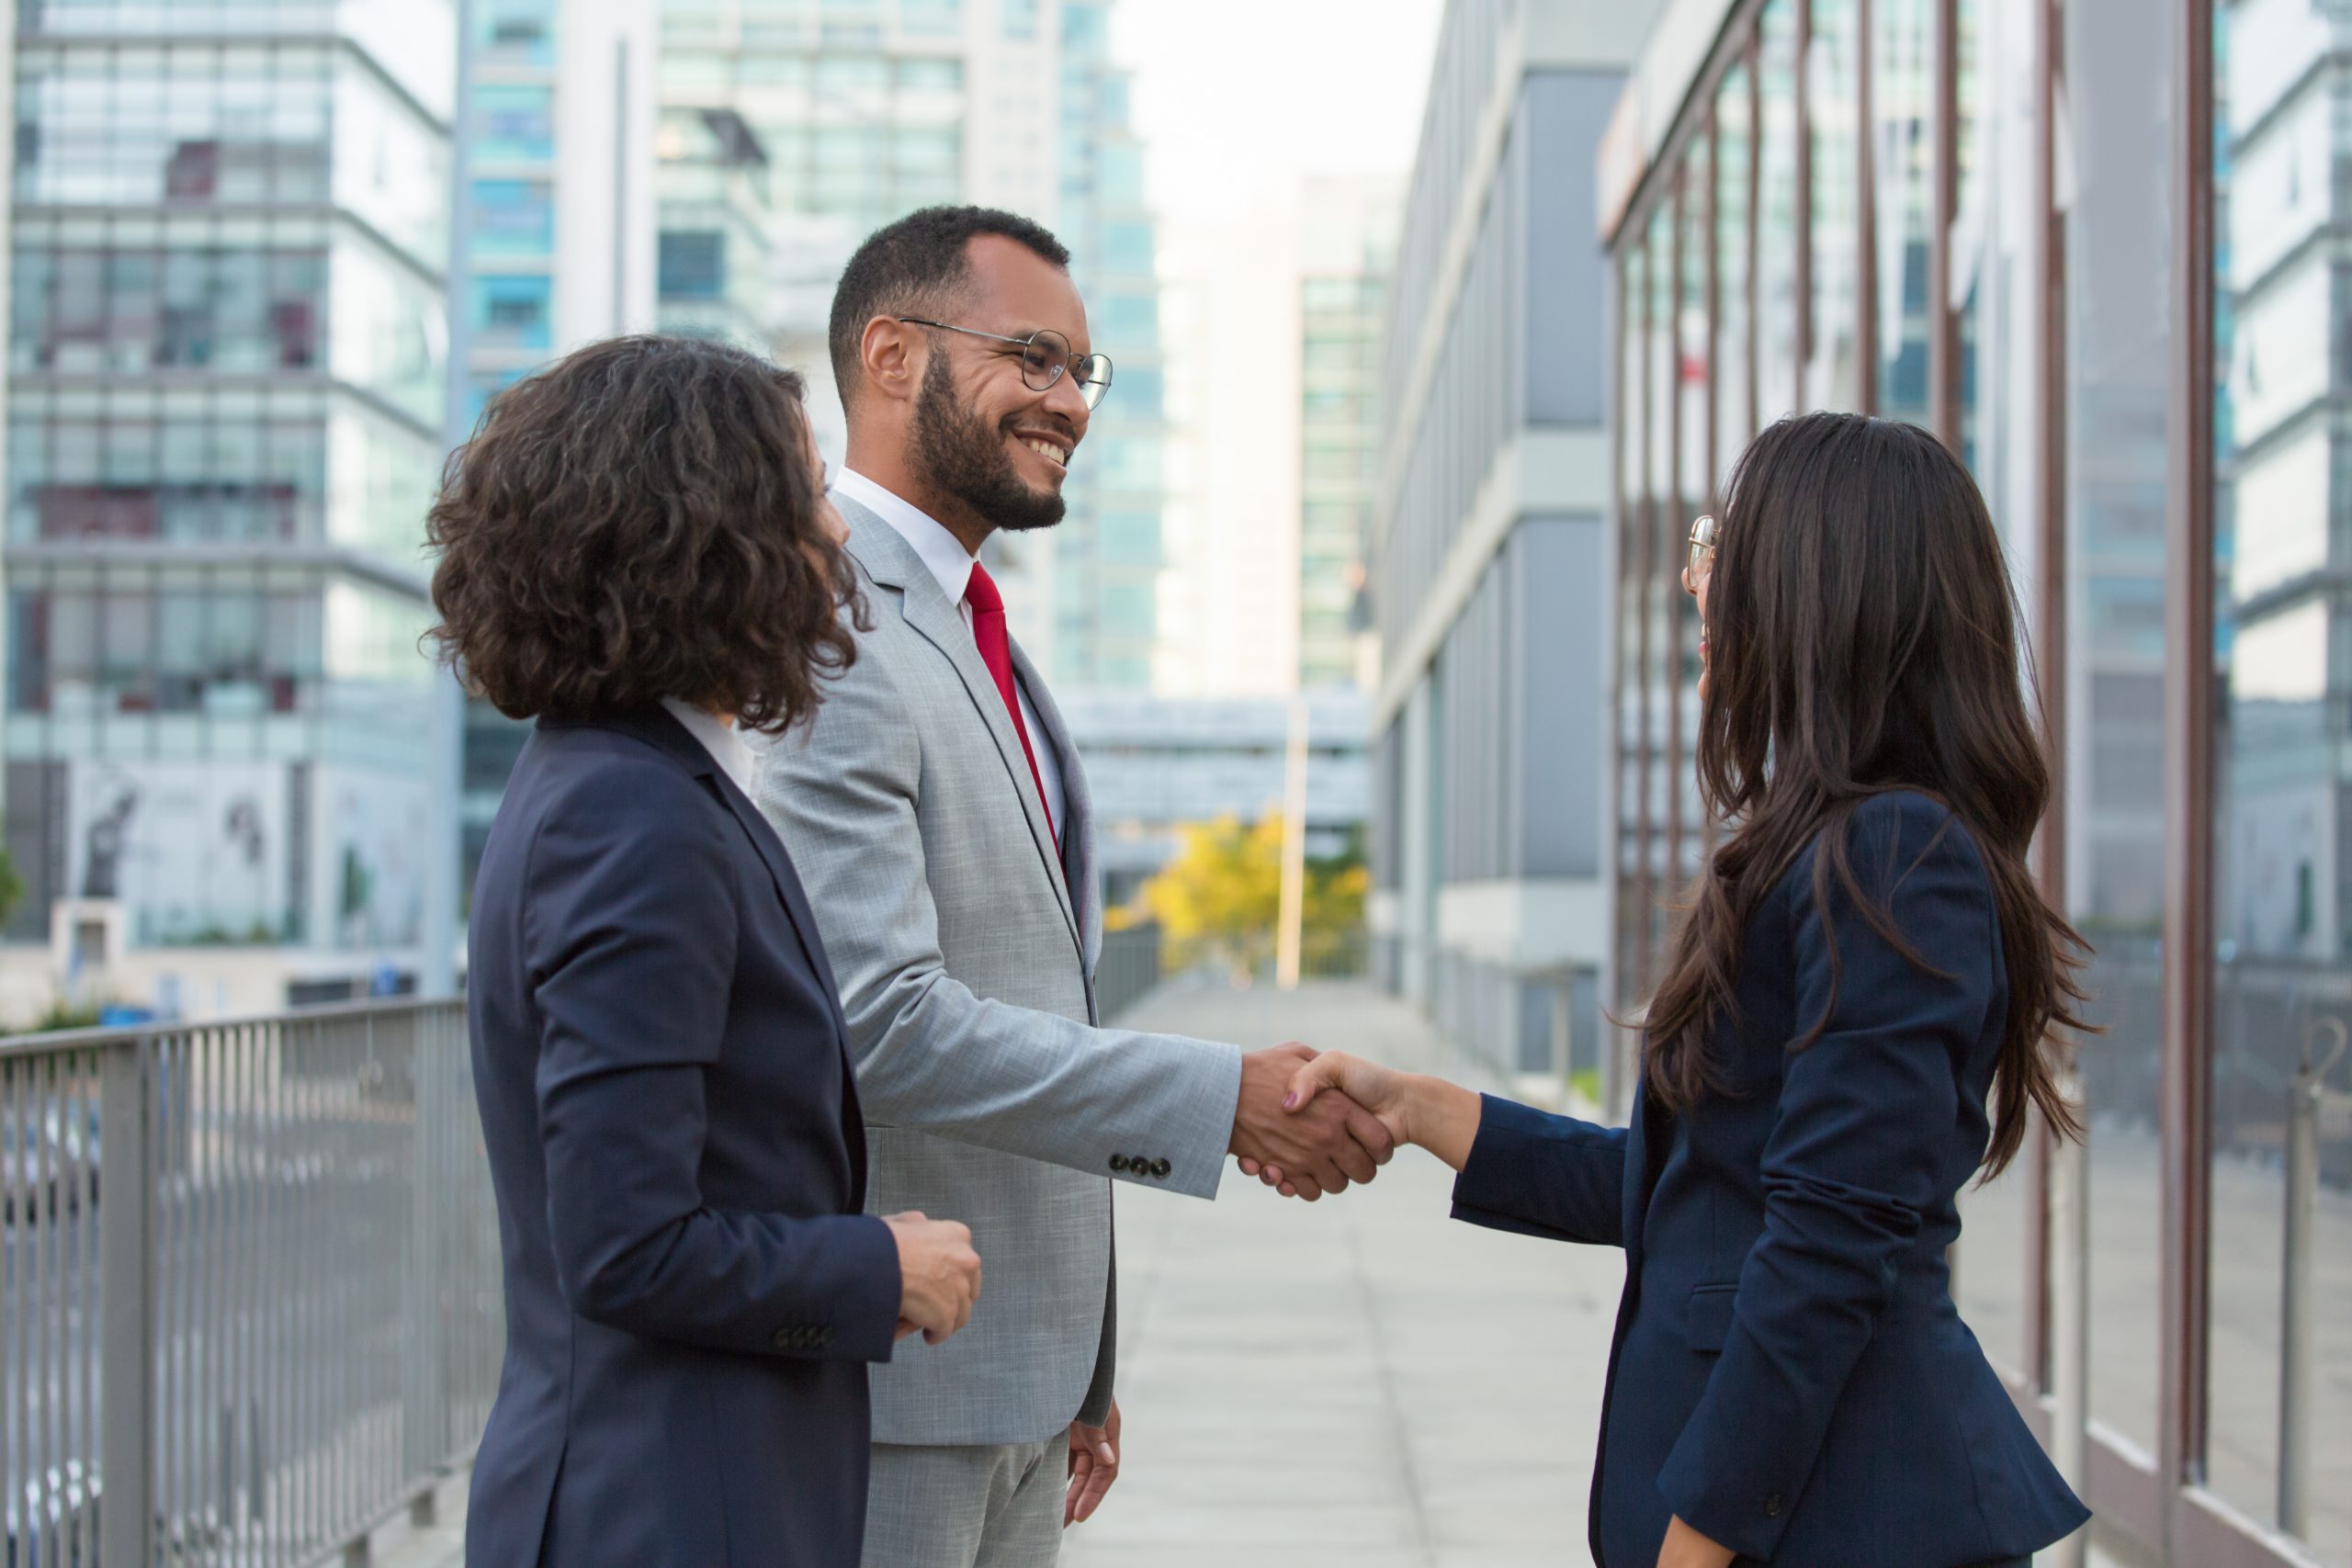 Happy positive business people meeting outside. Business man and women standing in city street, shaking hands, smiling and talking. Business communication concept